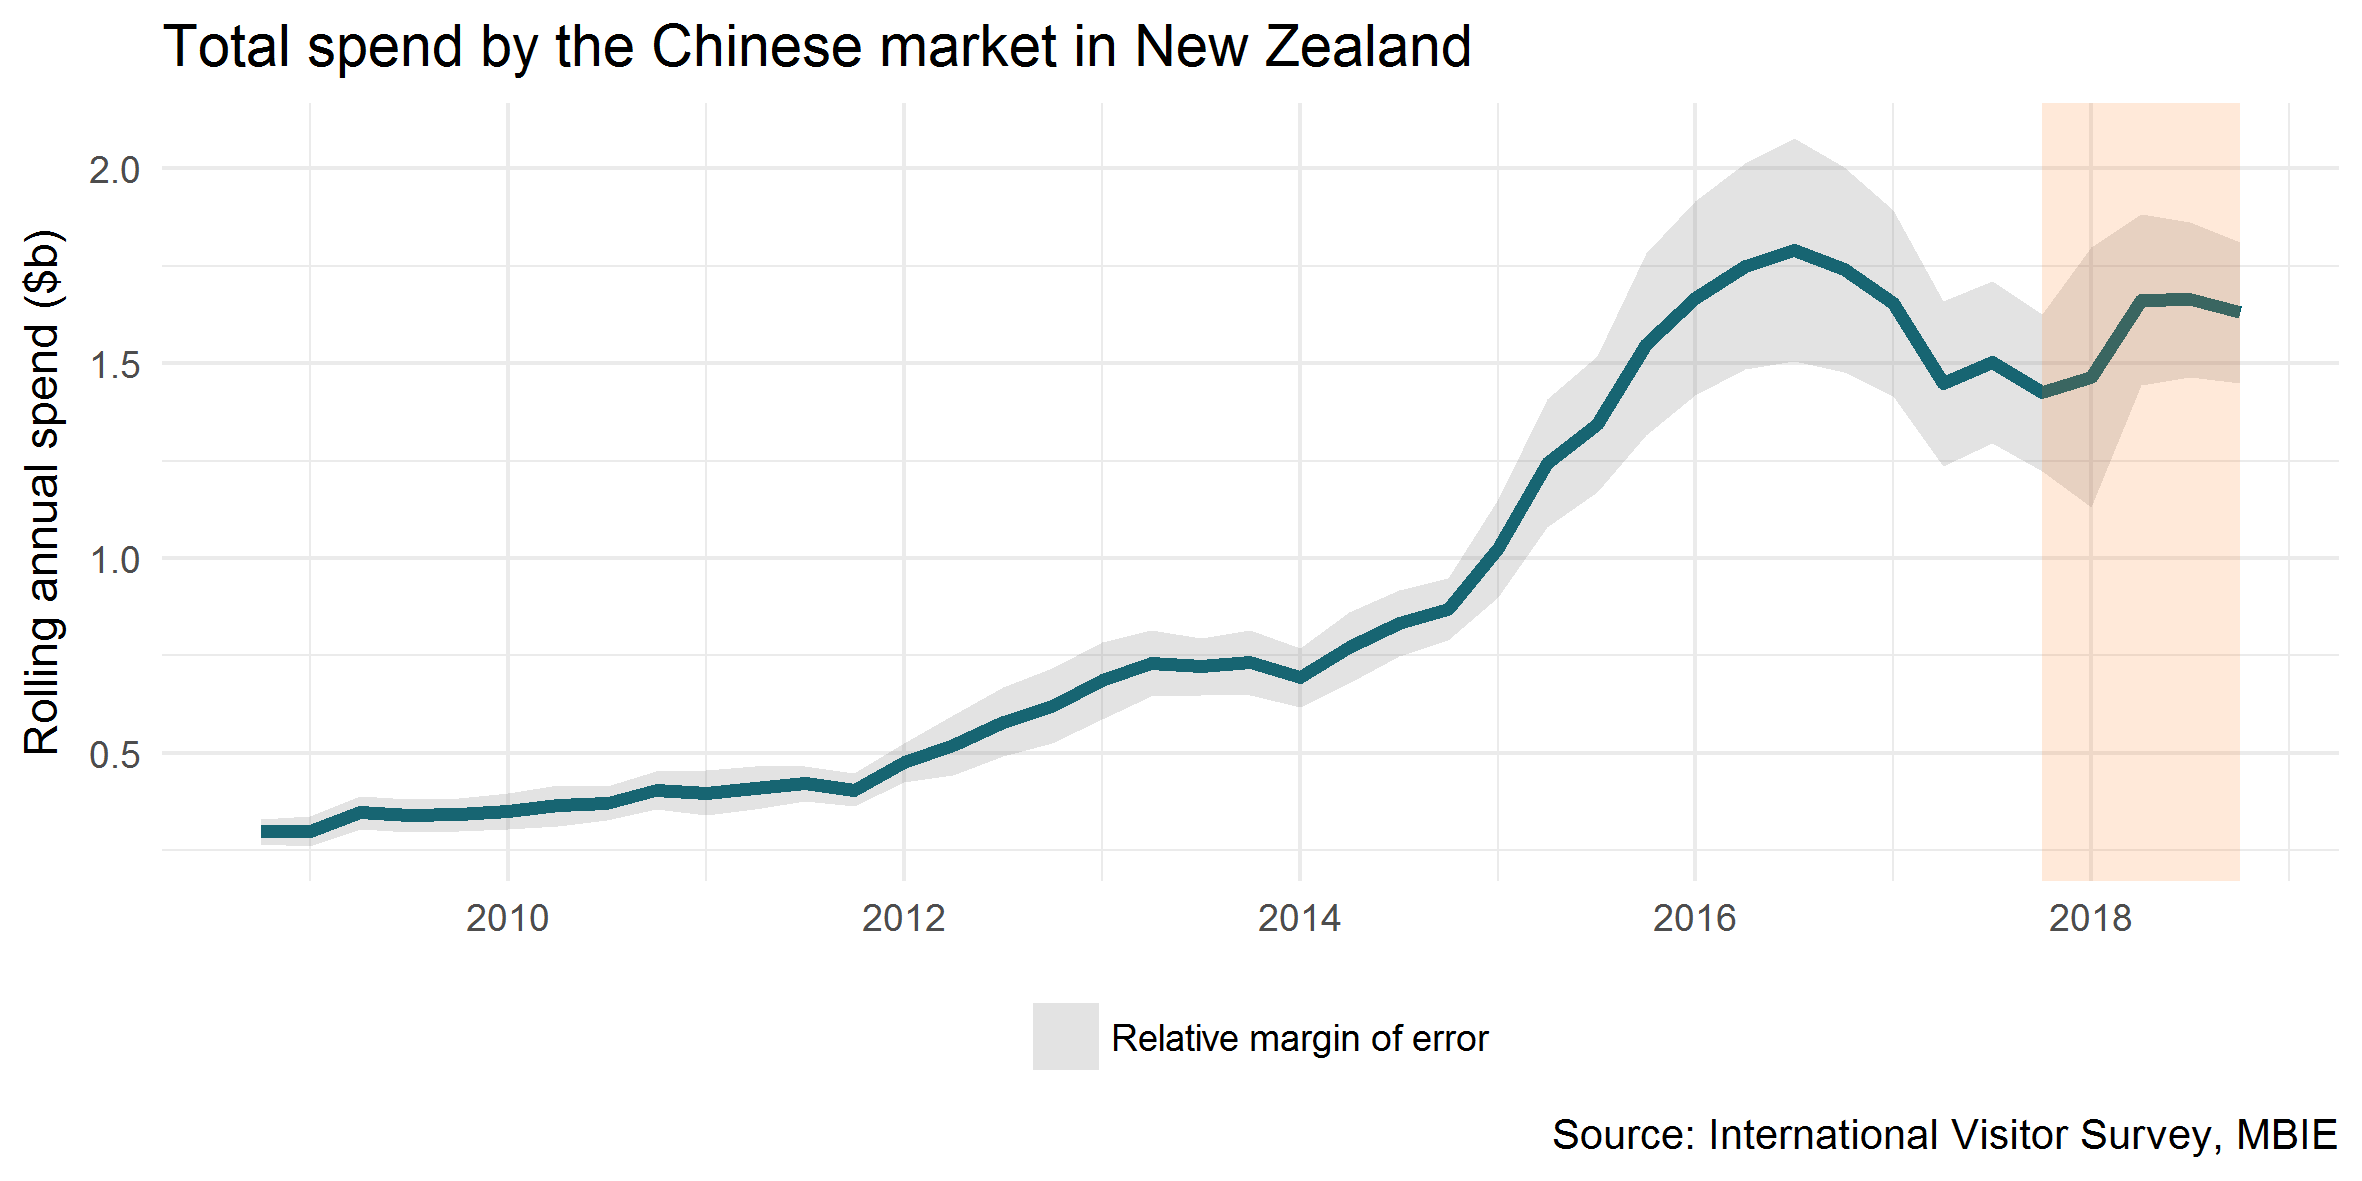 Total spend by Chinese market in New Zealand